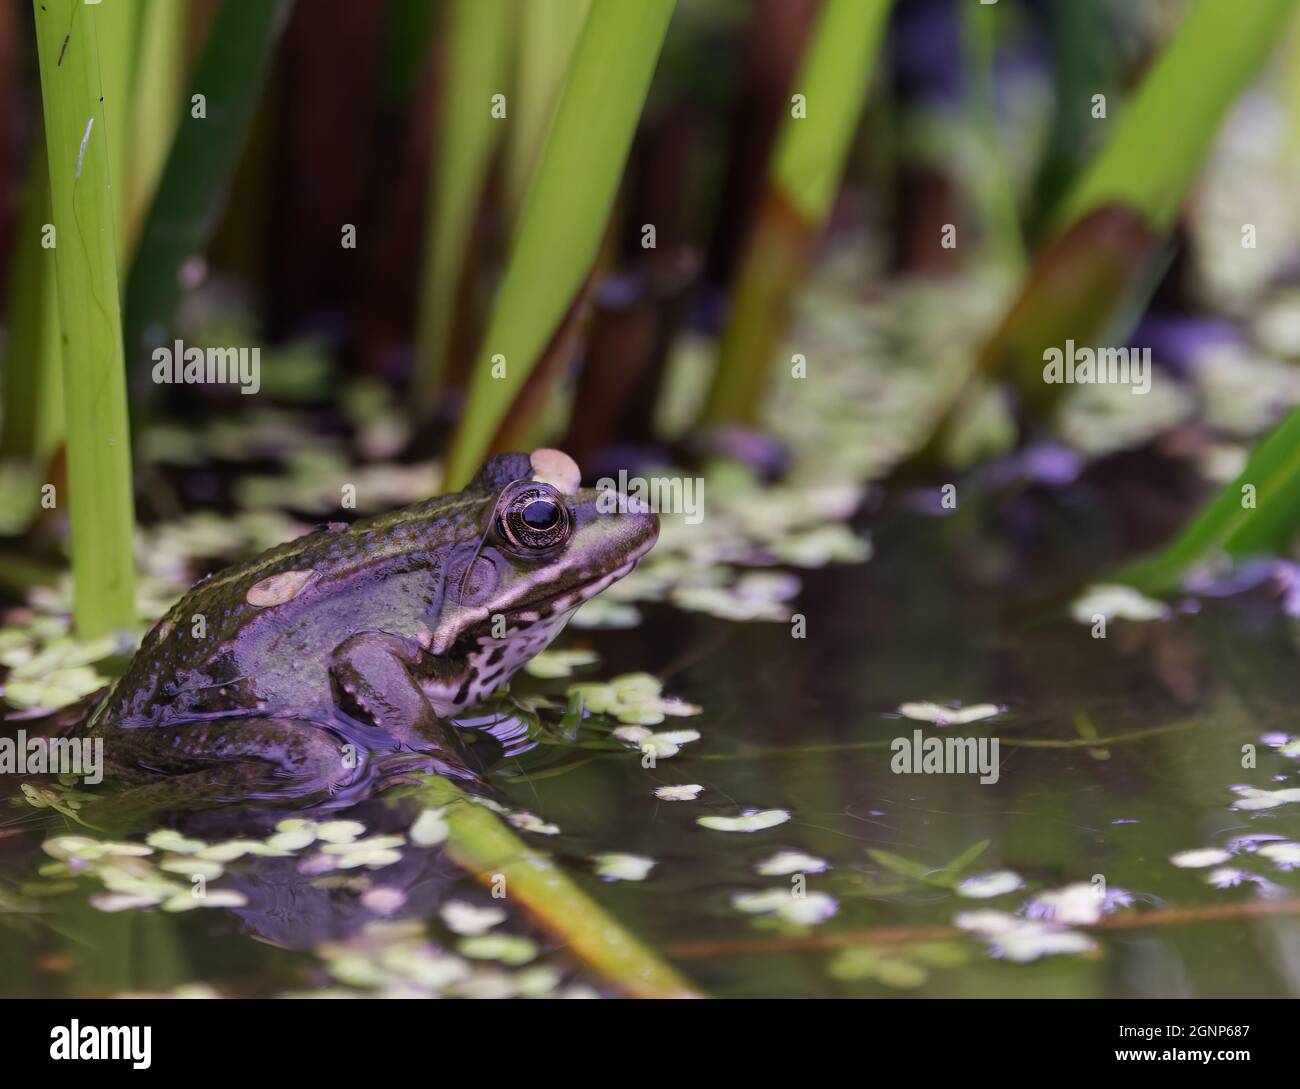 common frog sitting in pond Stock Photo